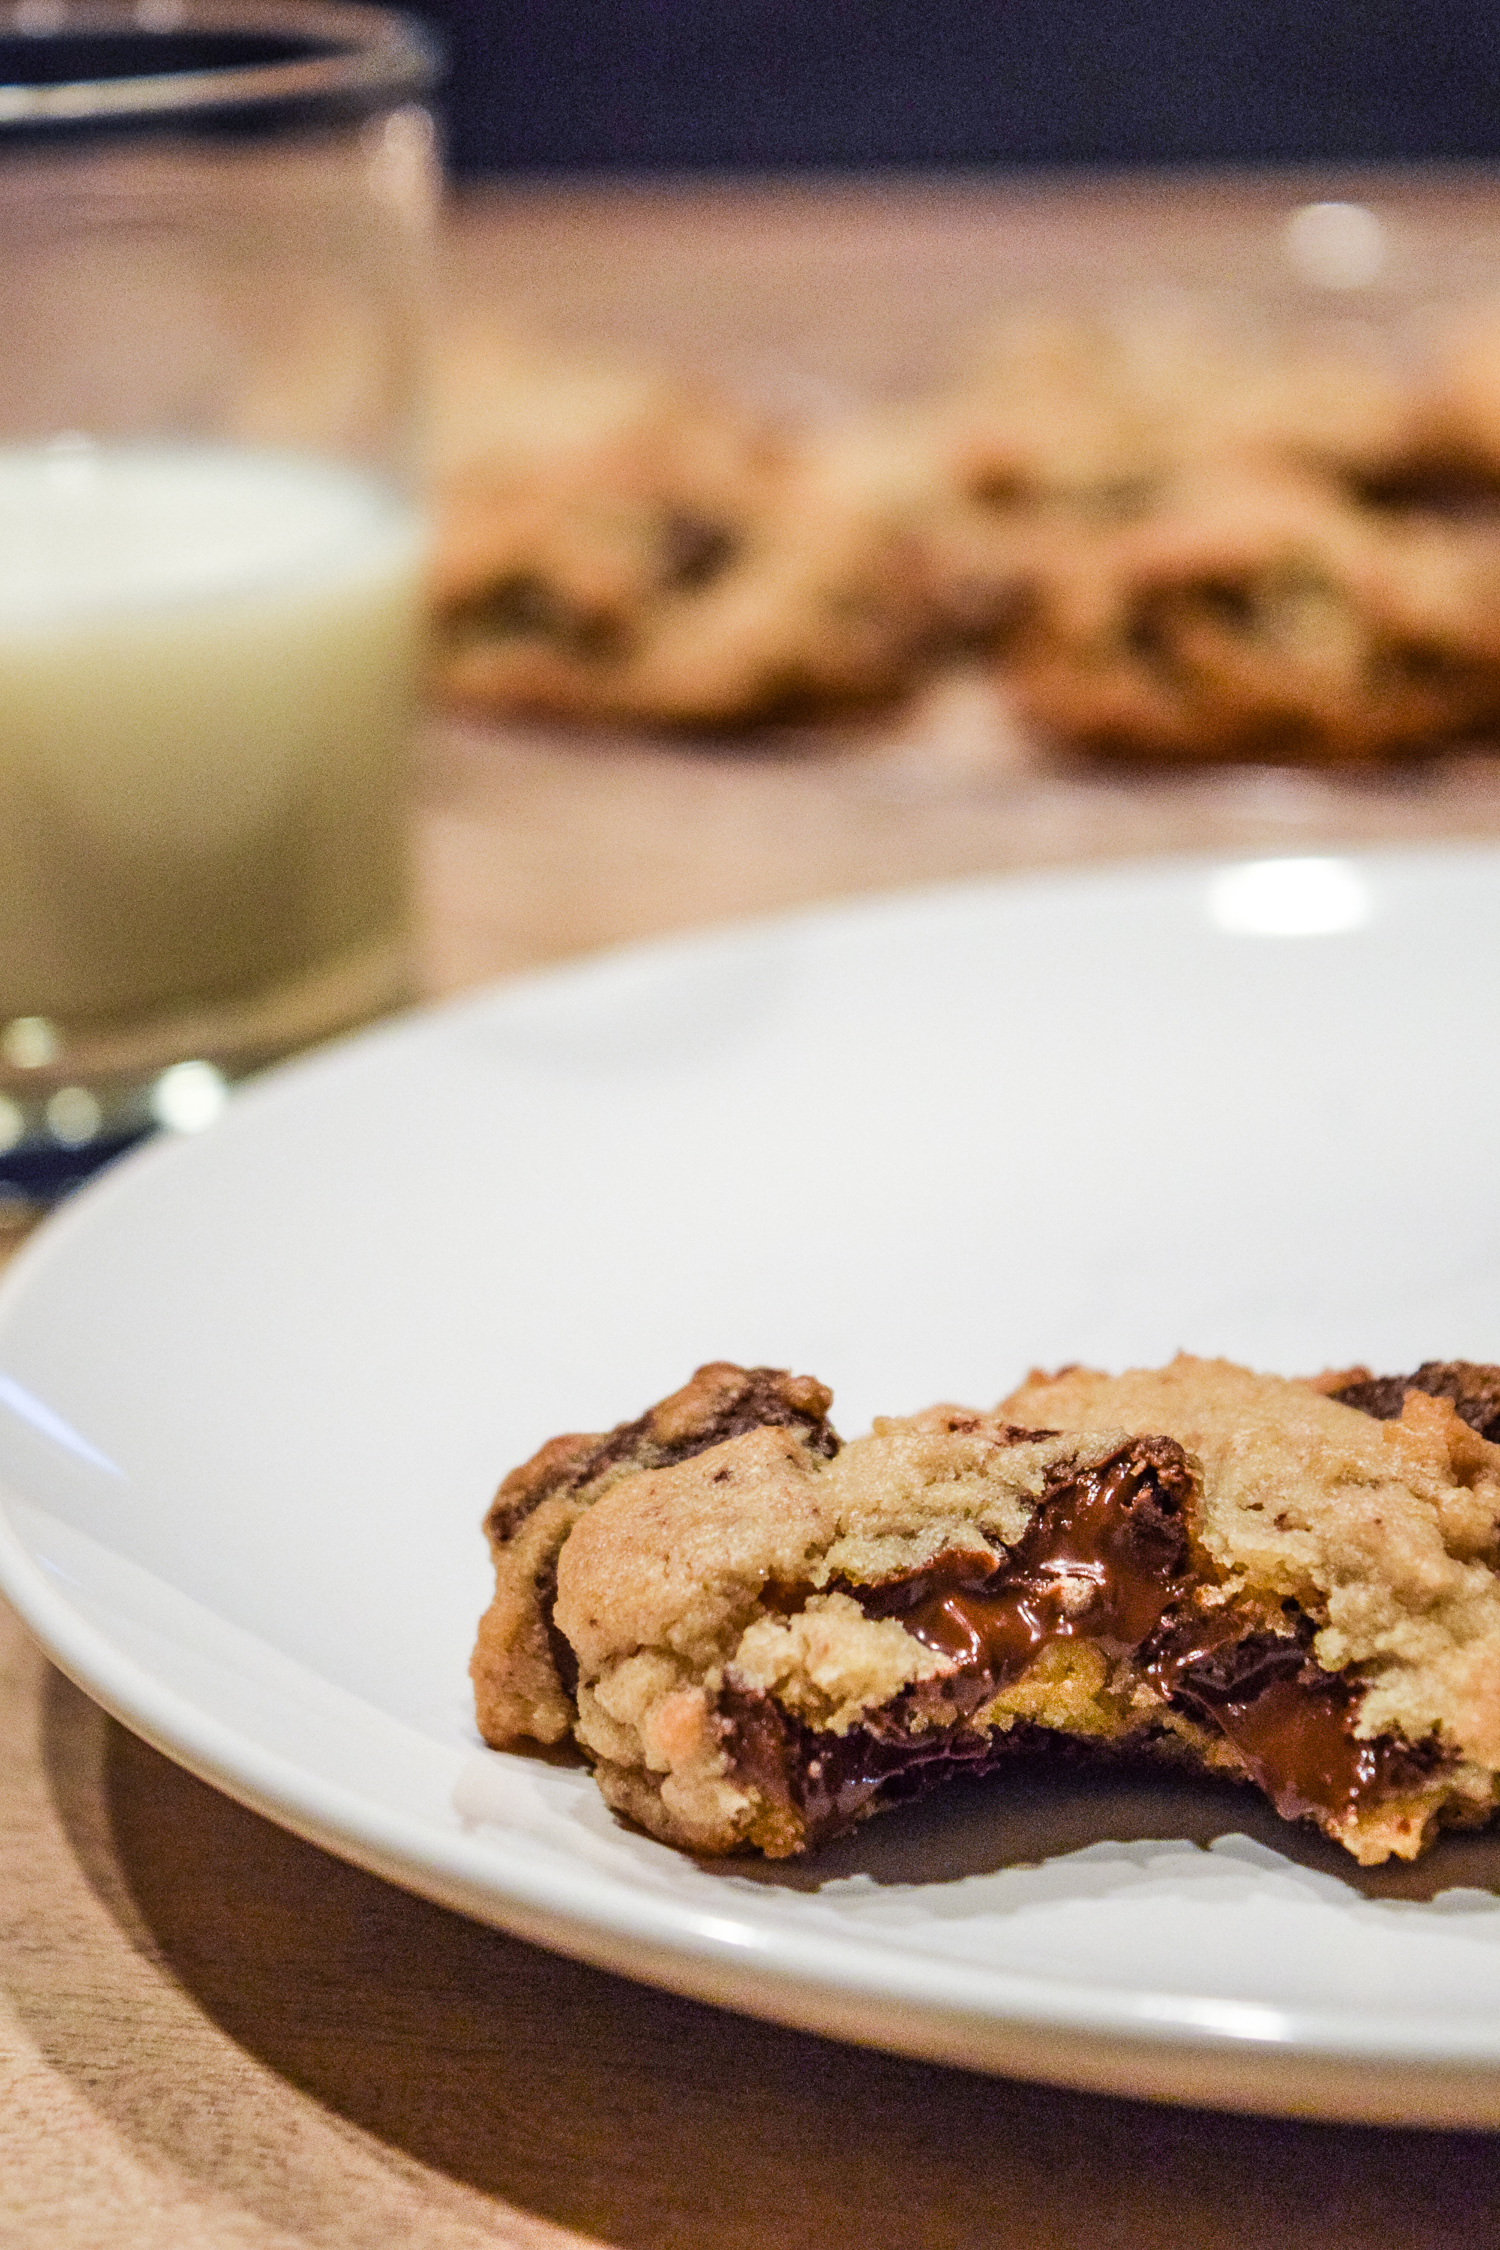 Specialty's Semi-Sweet Chocolate Chunk Cookies with gooey chocolate and glass of milk